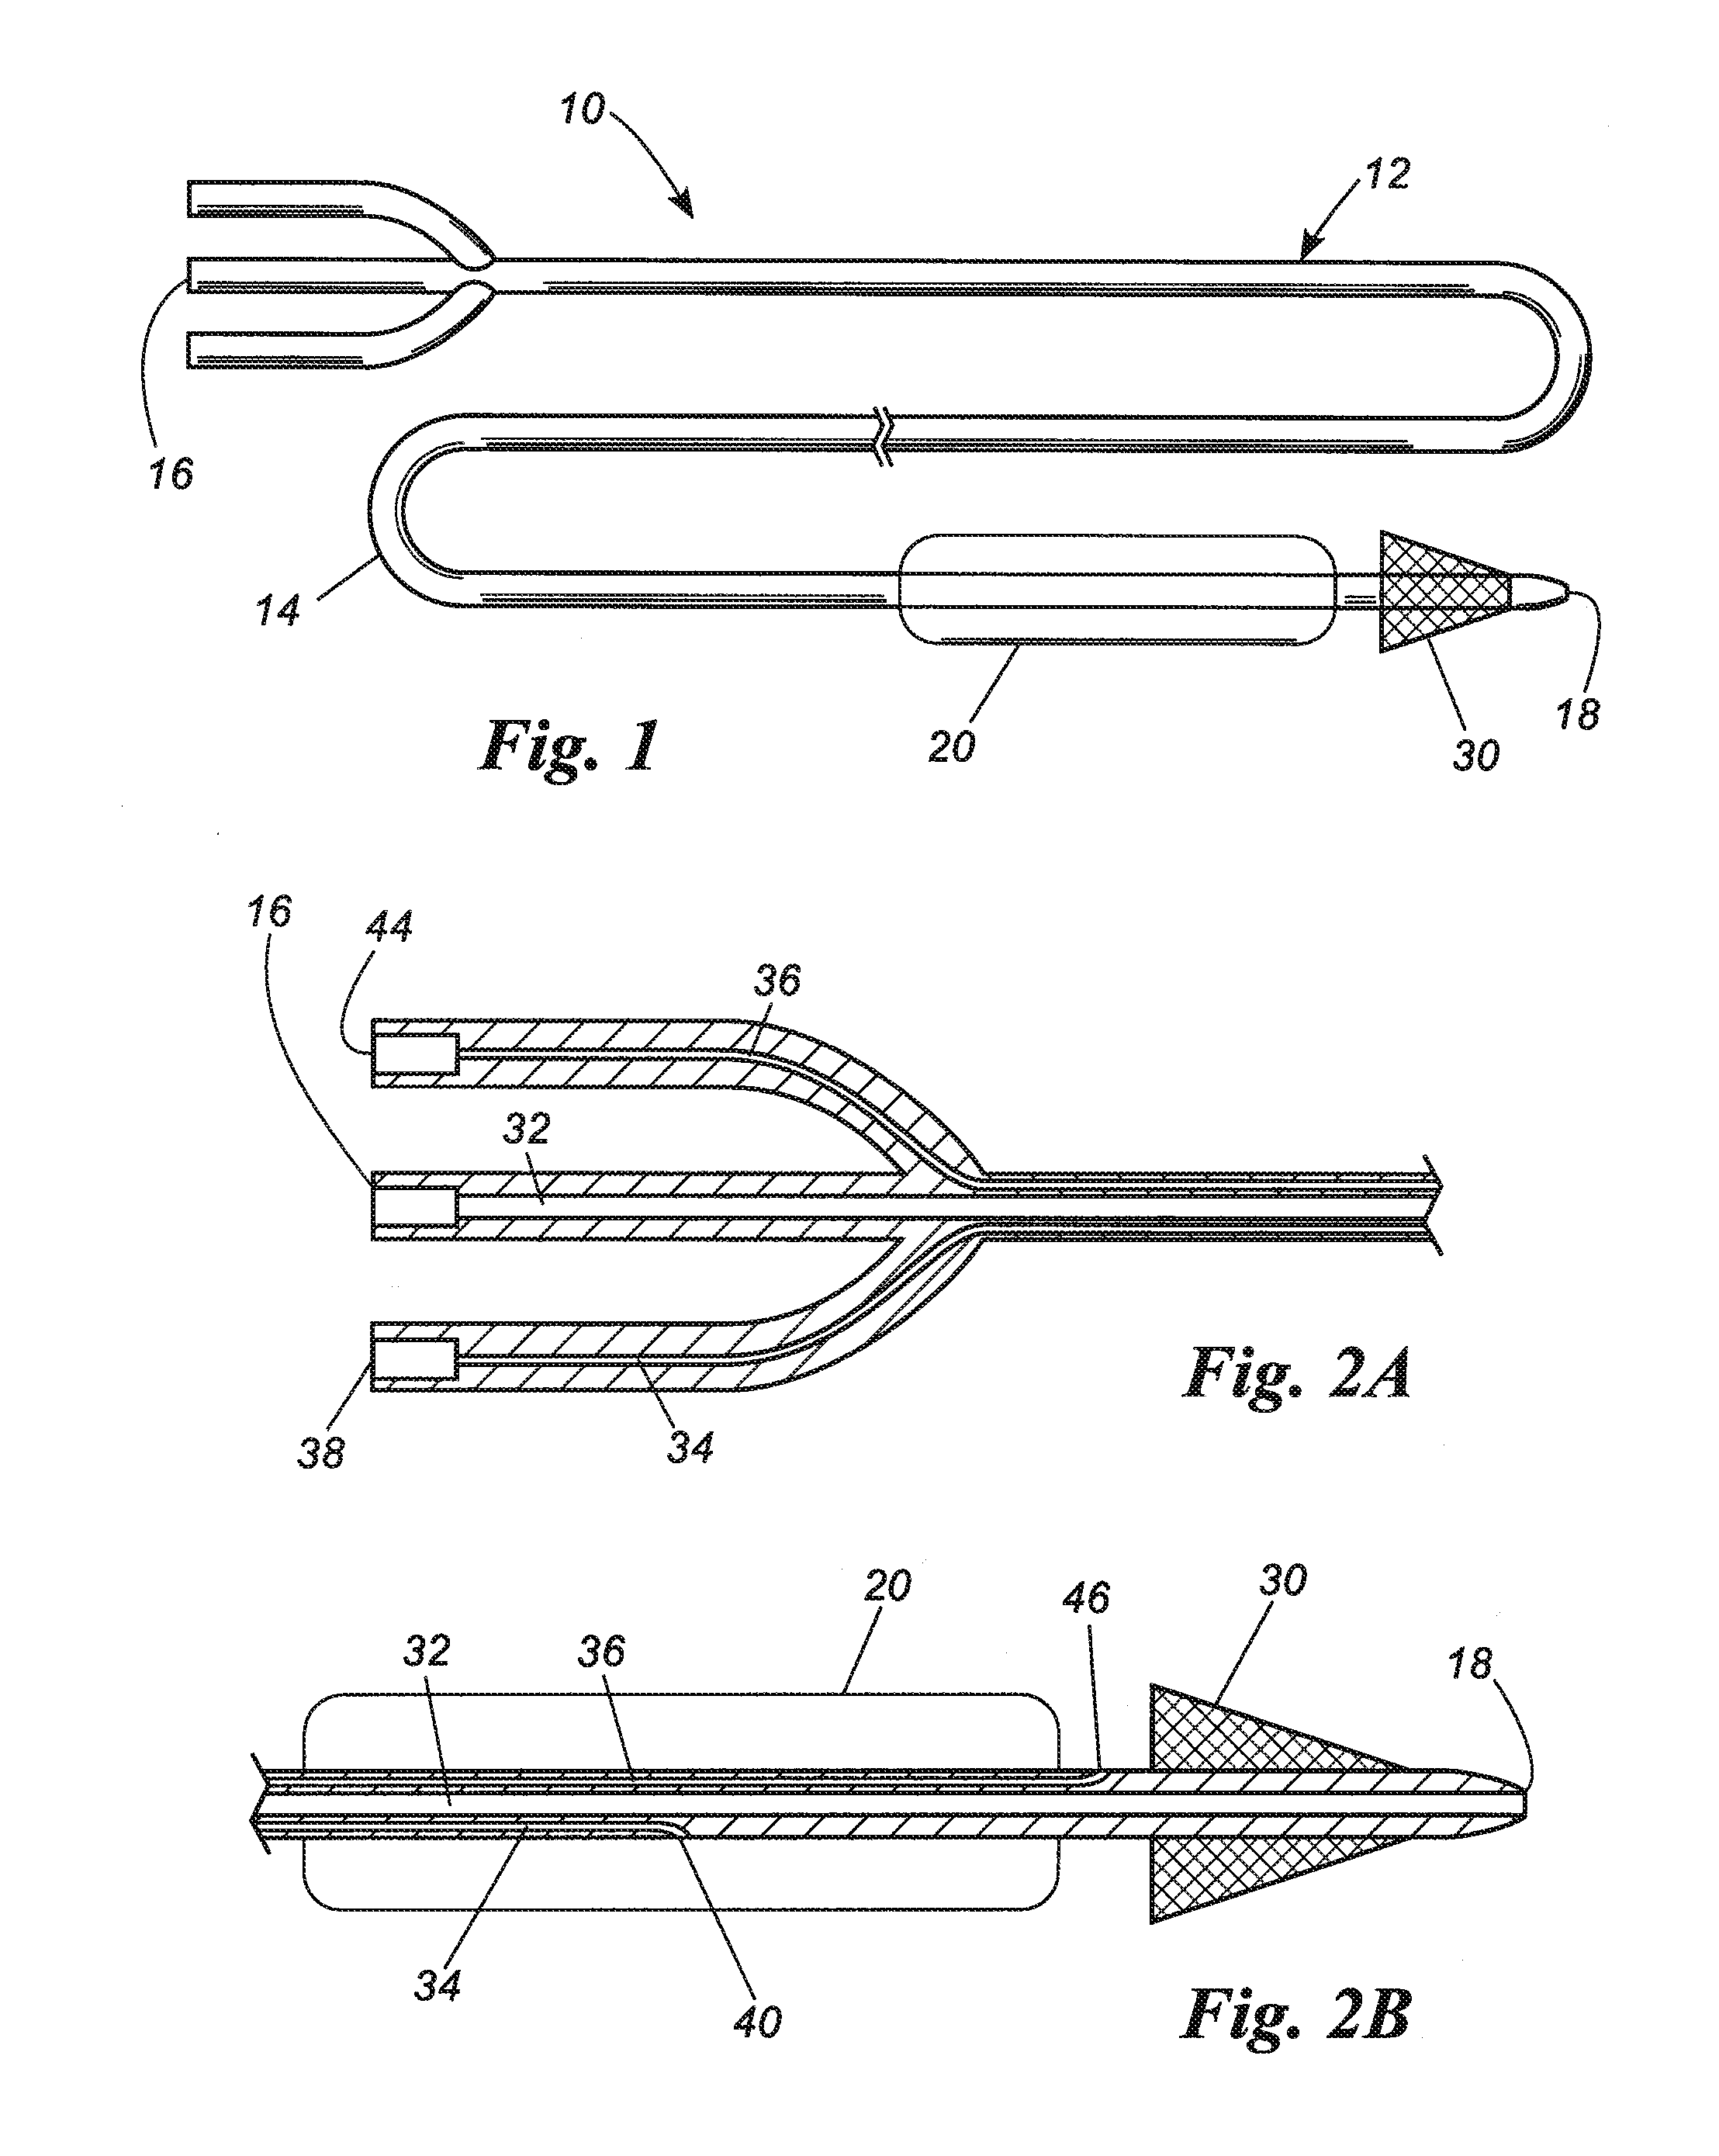 Percutaneous transluminal angioplasty device with integral embolic filter